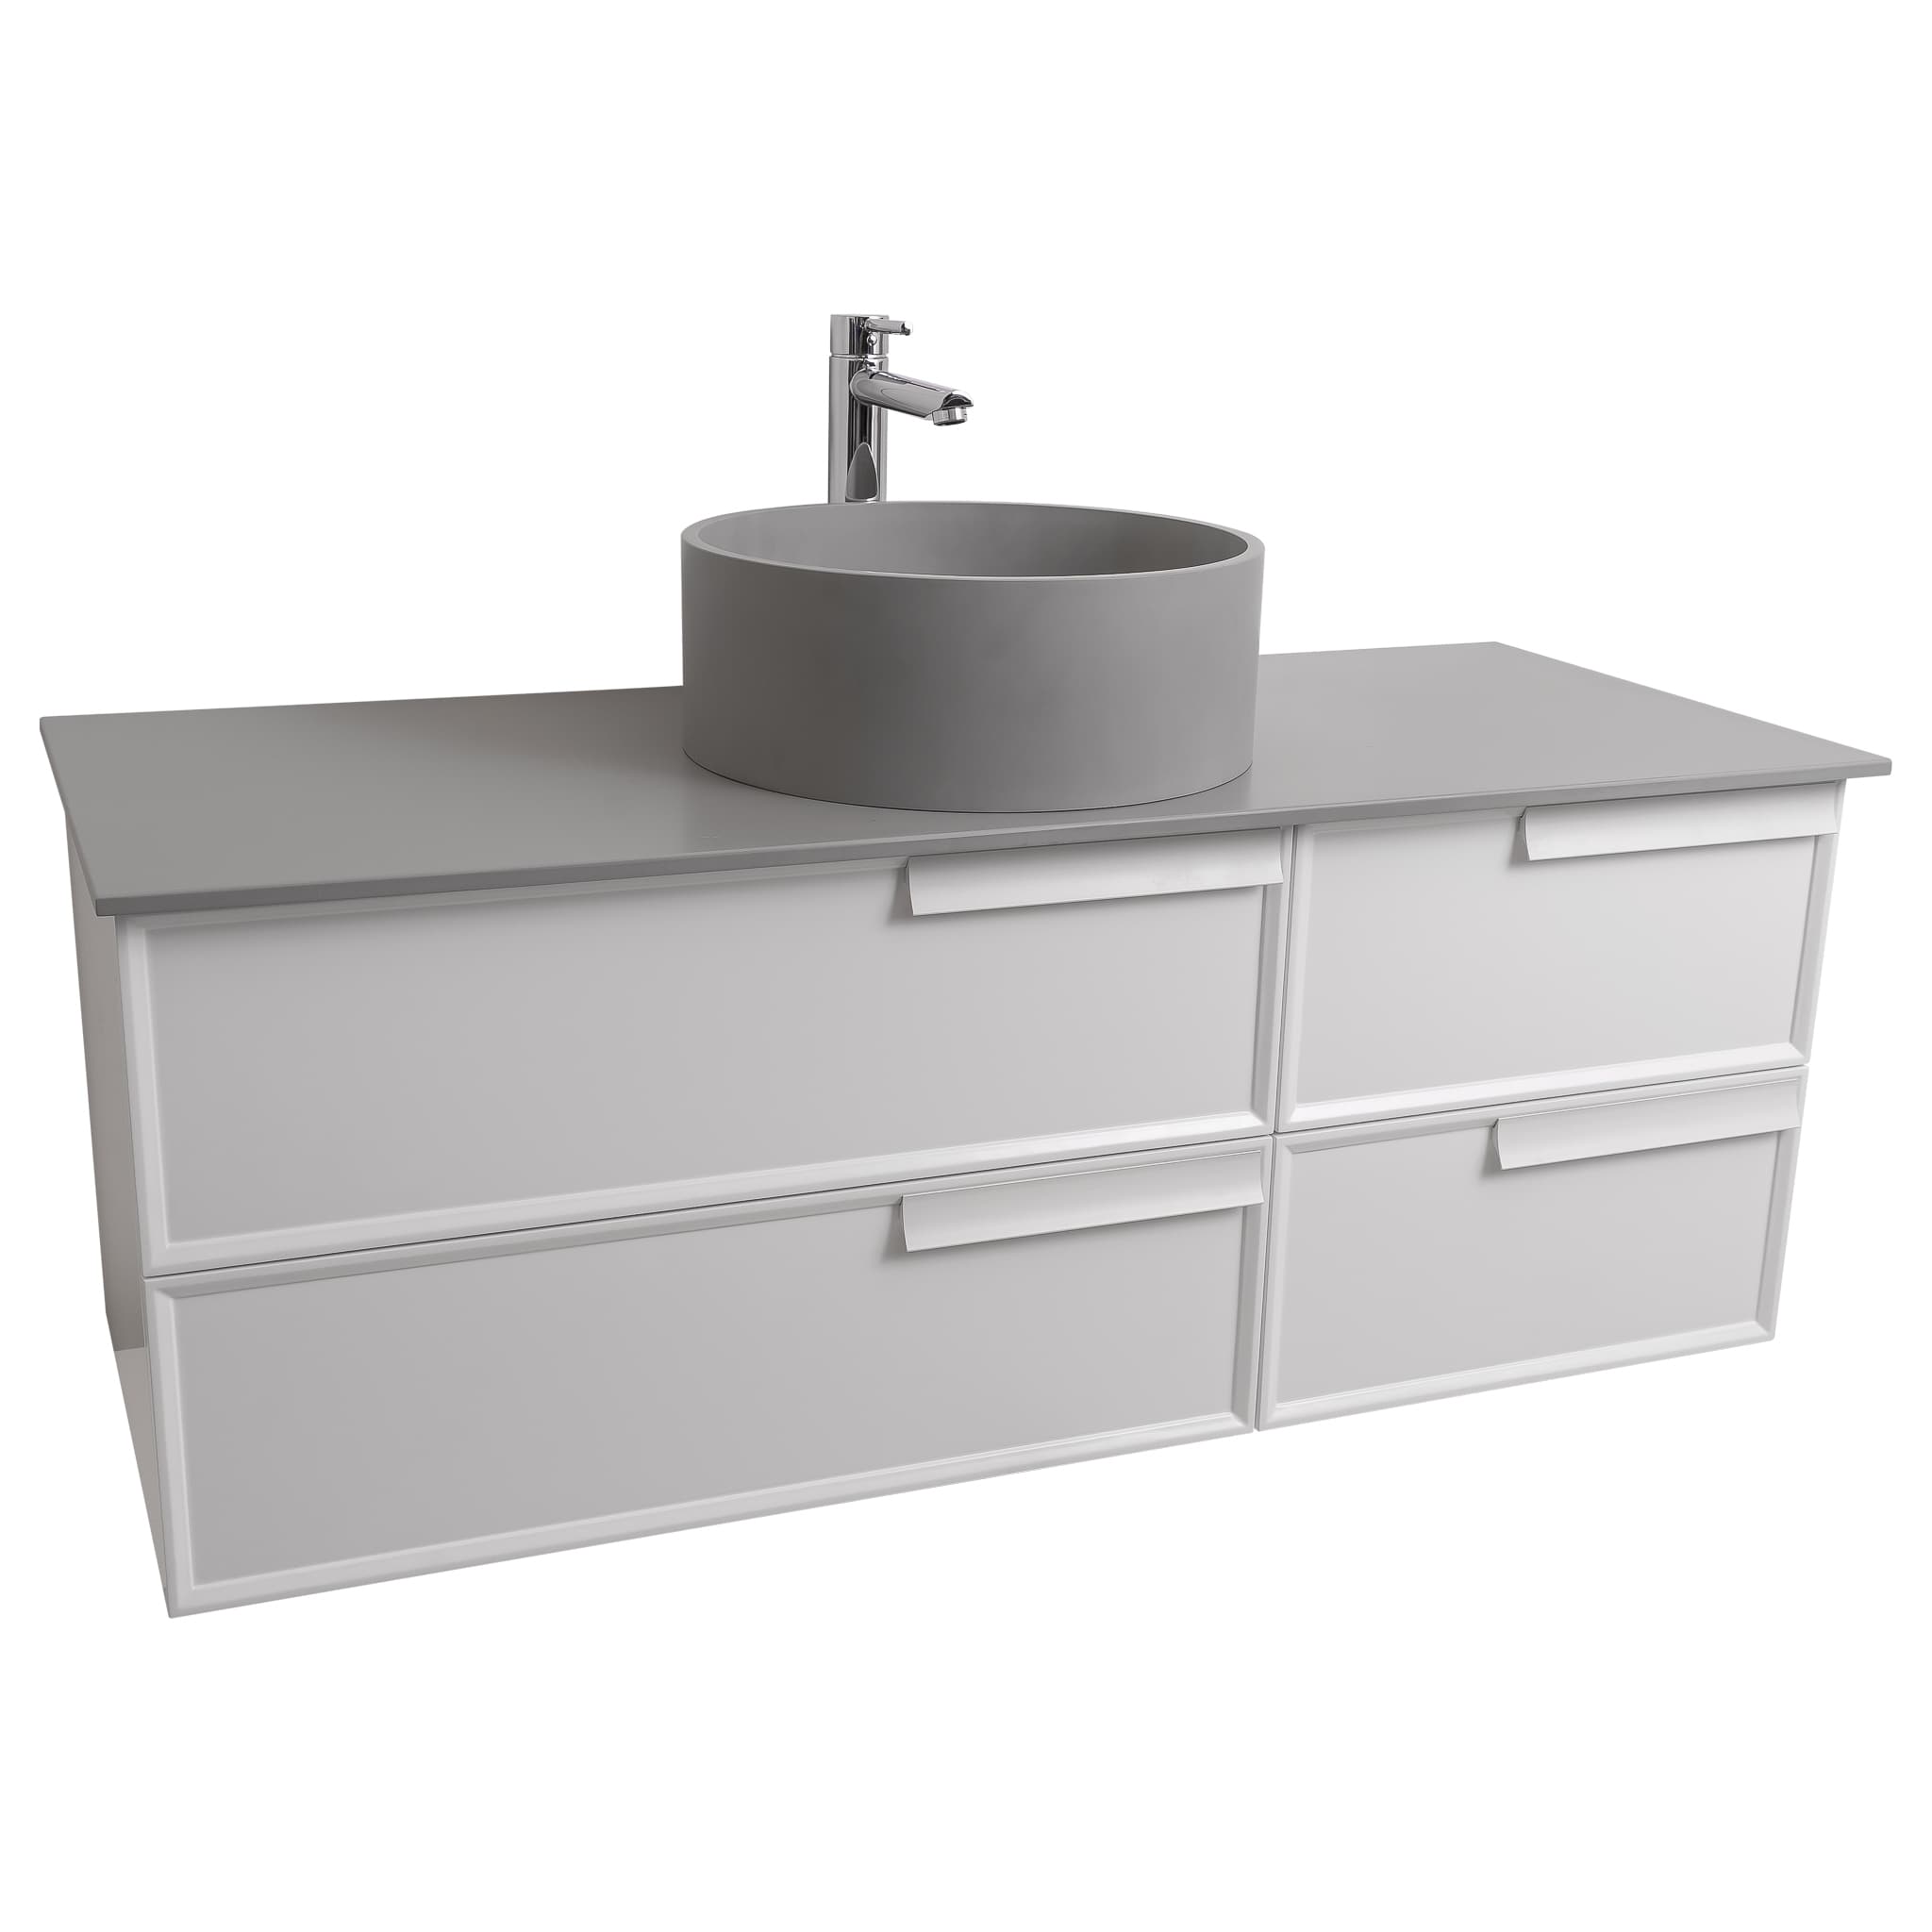 Garda 47.5 Matte White Cabinet, Solid Surface Flat Grey Counter and Round Solid Surface Grey Basin 1386, Wall Mounted Modern Vanity Set